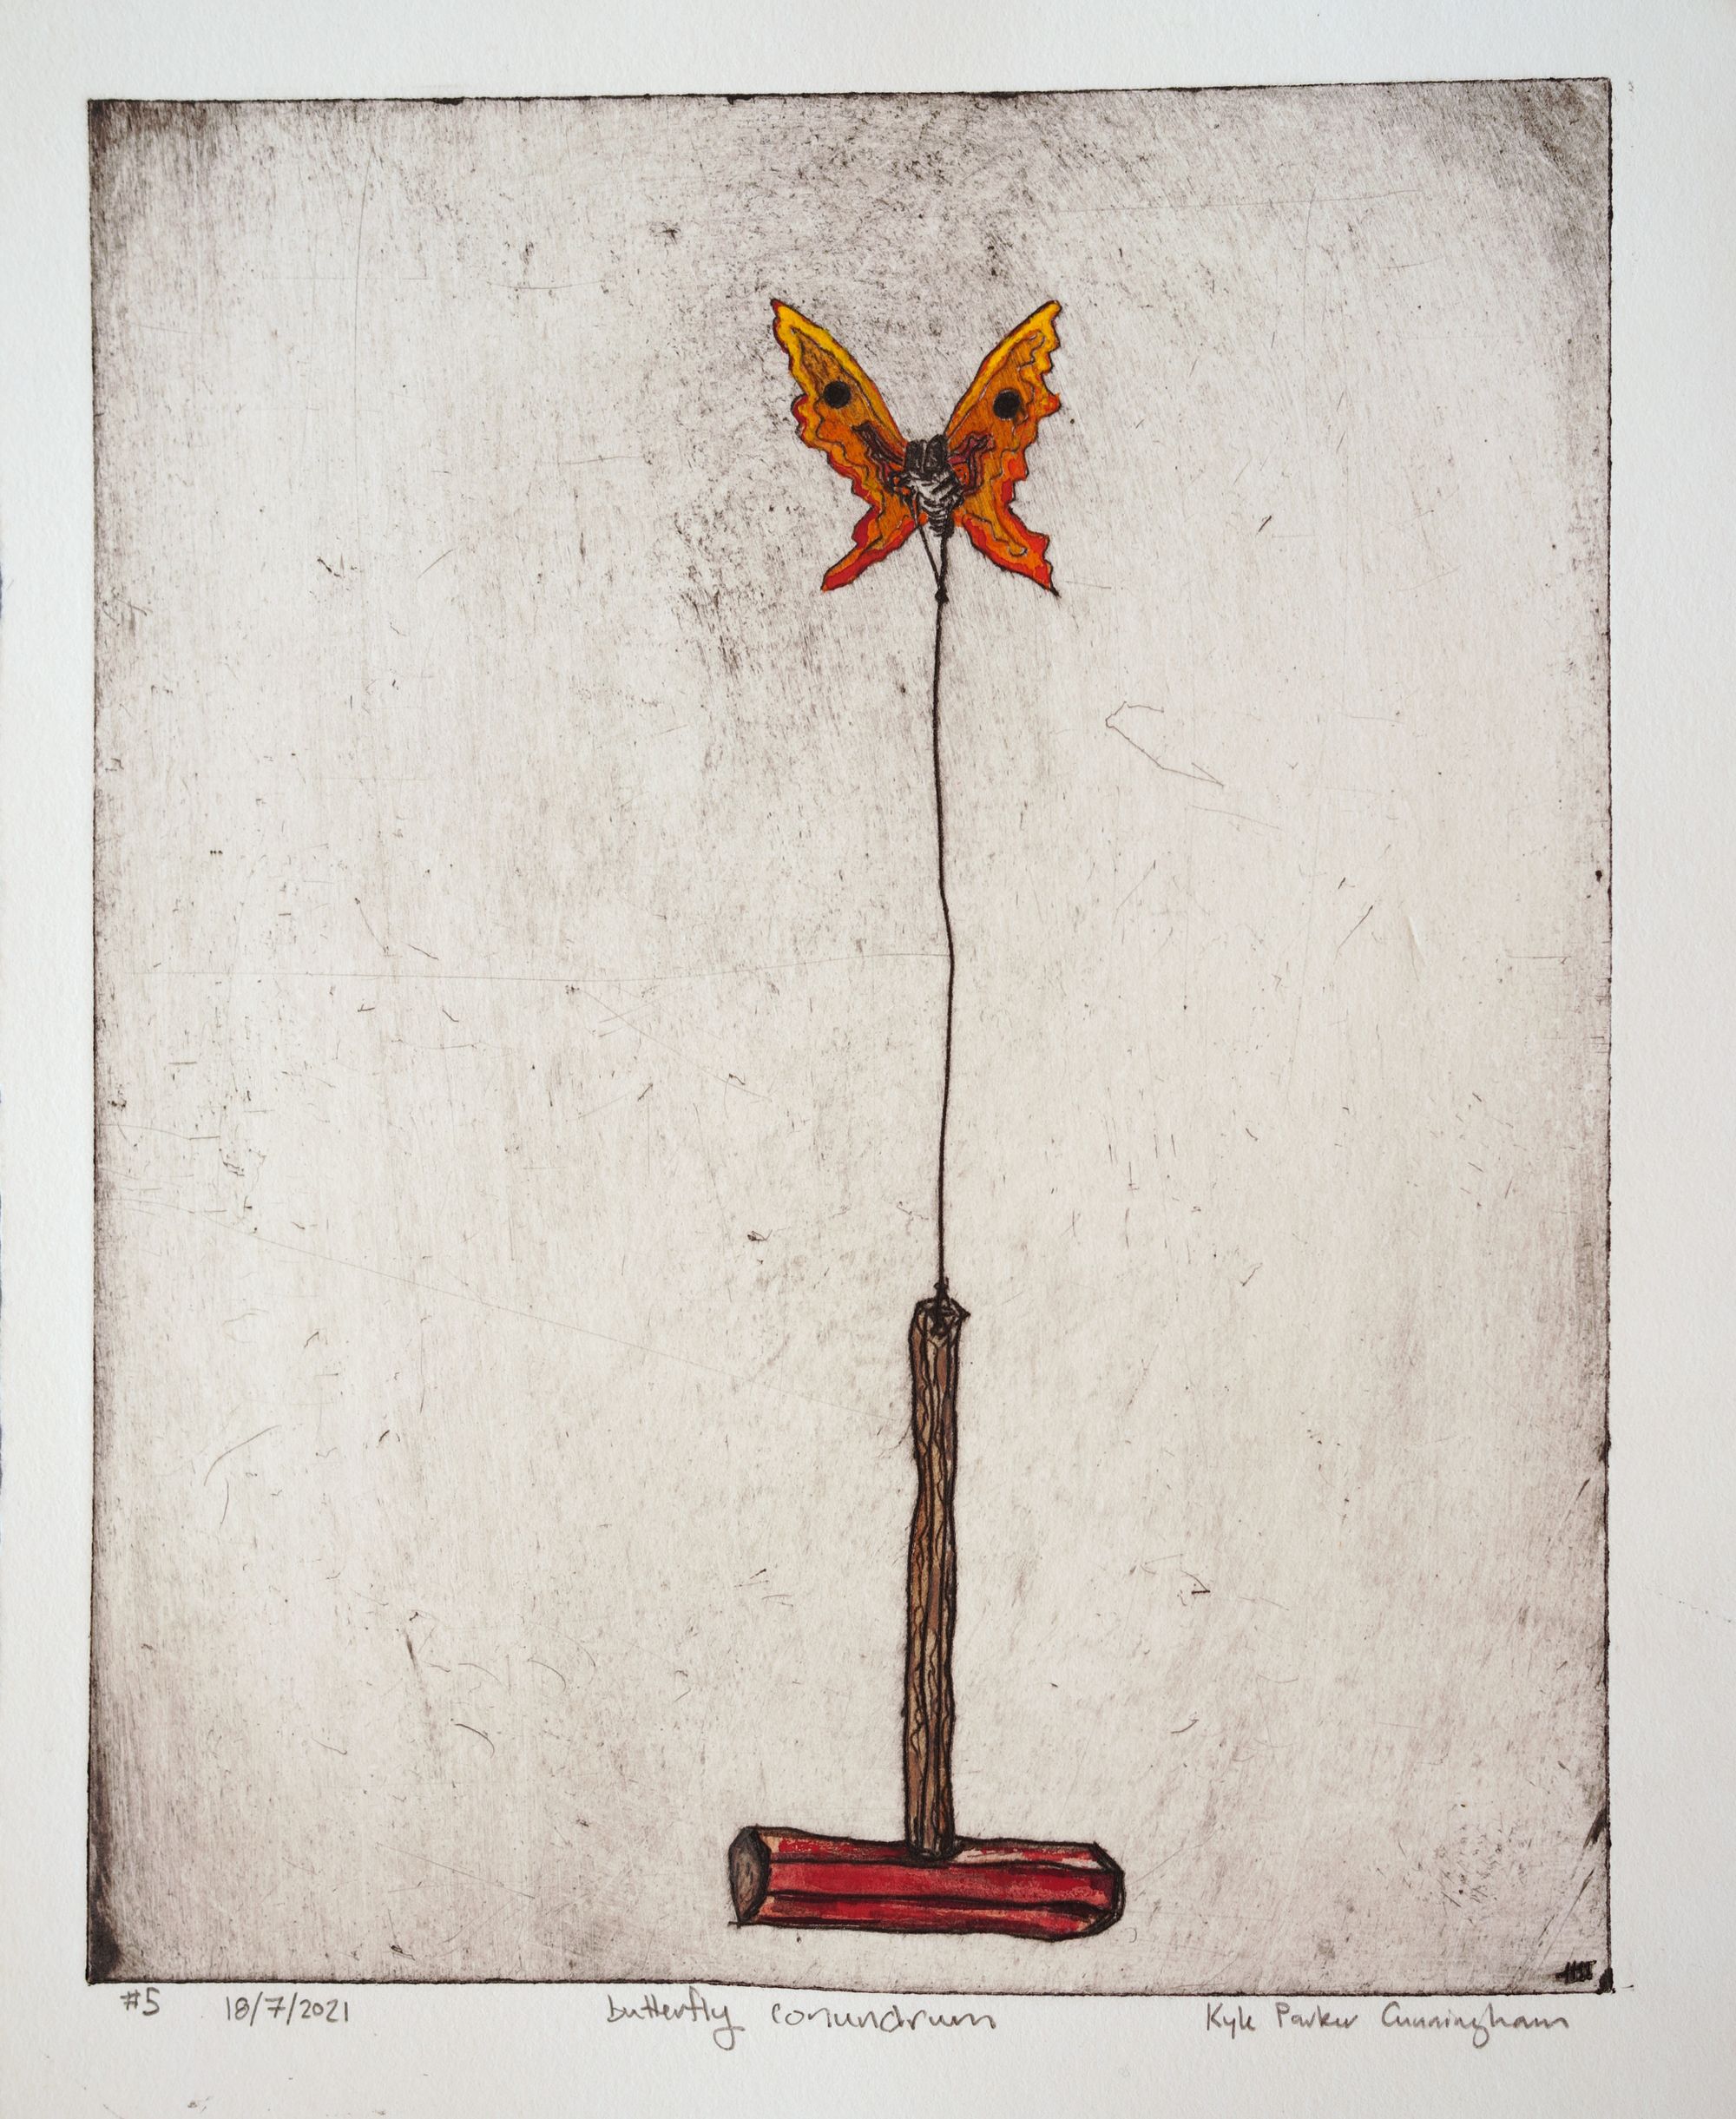 A print of a large red hammer being carried by an orange butterfly.